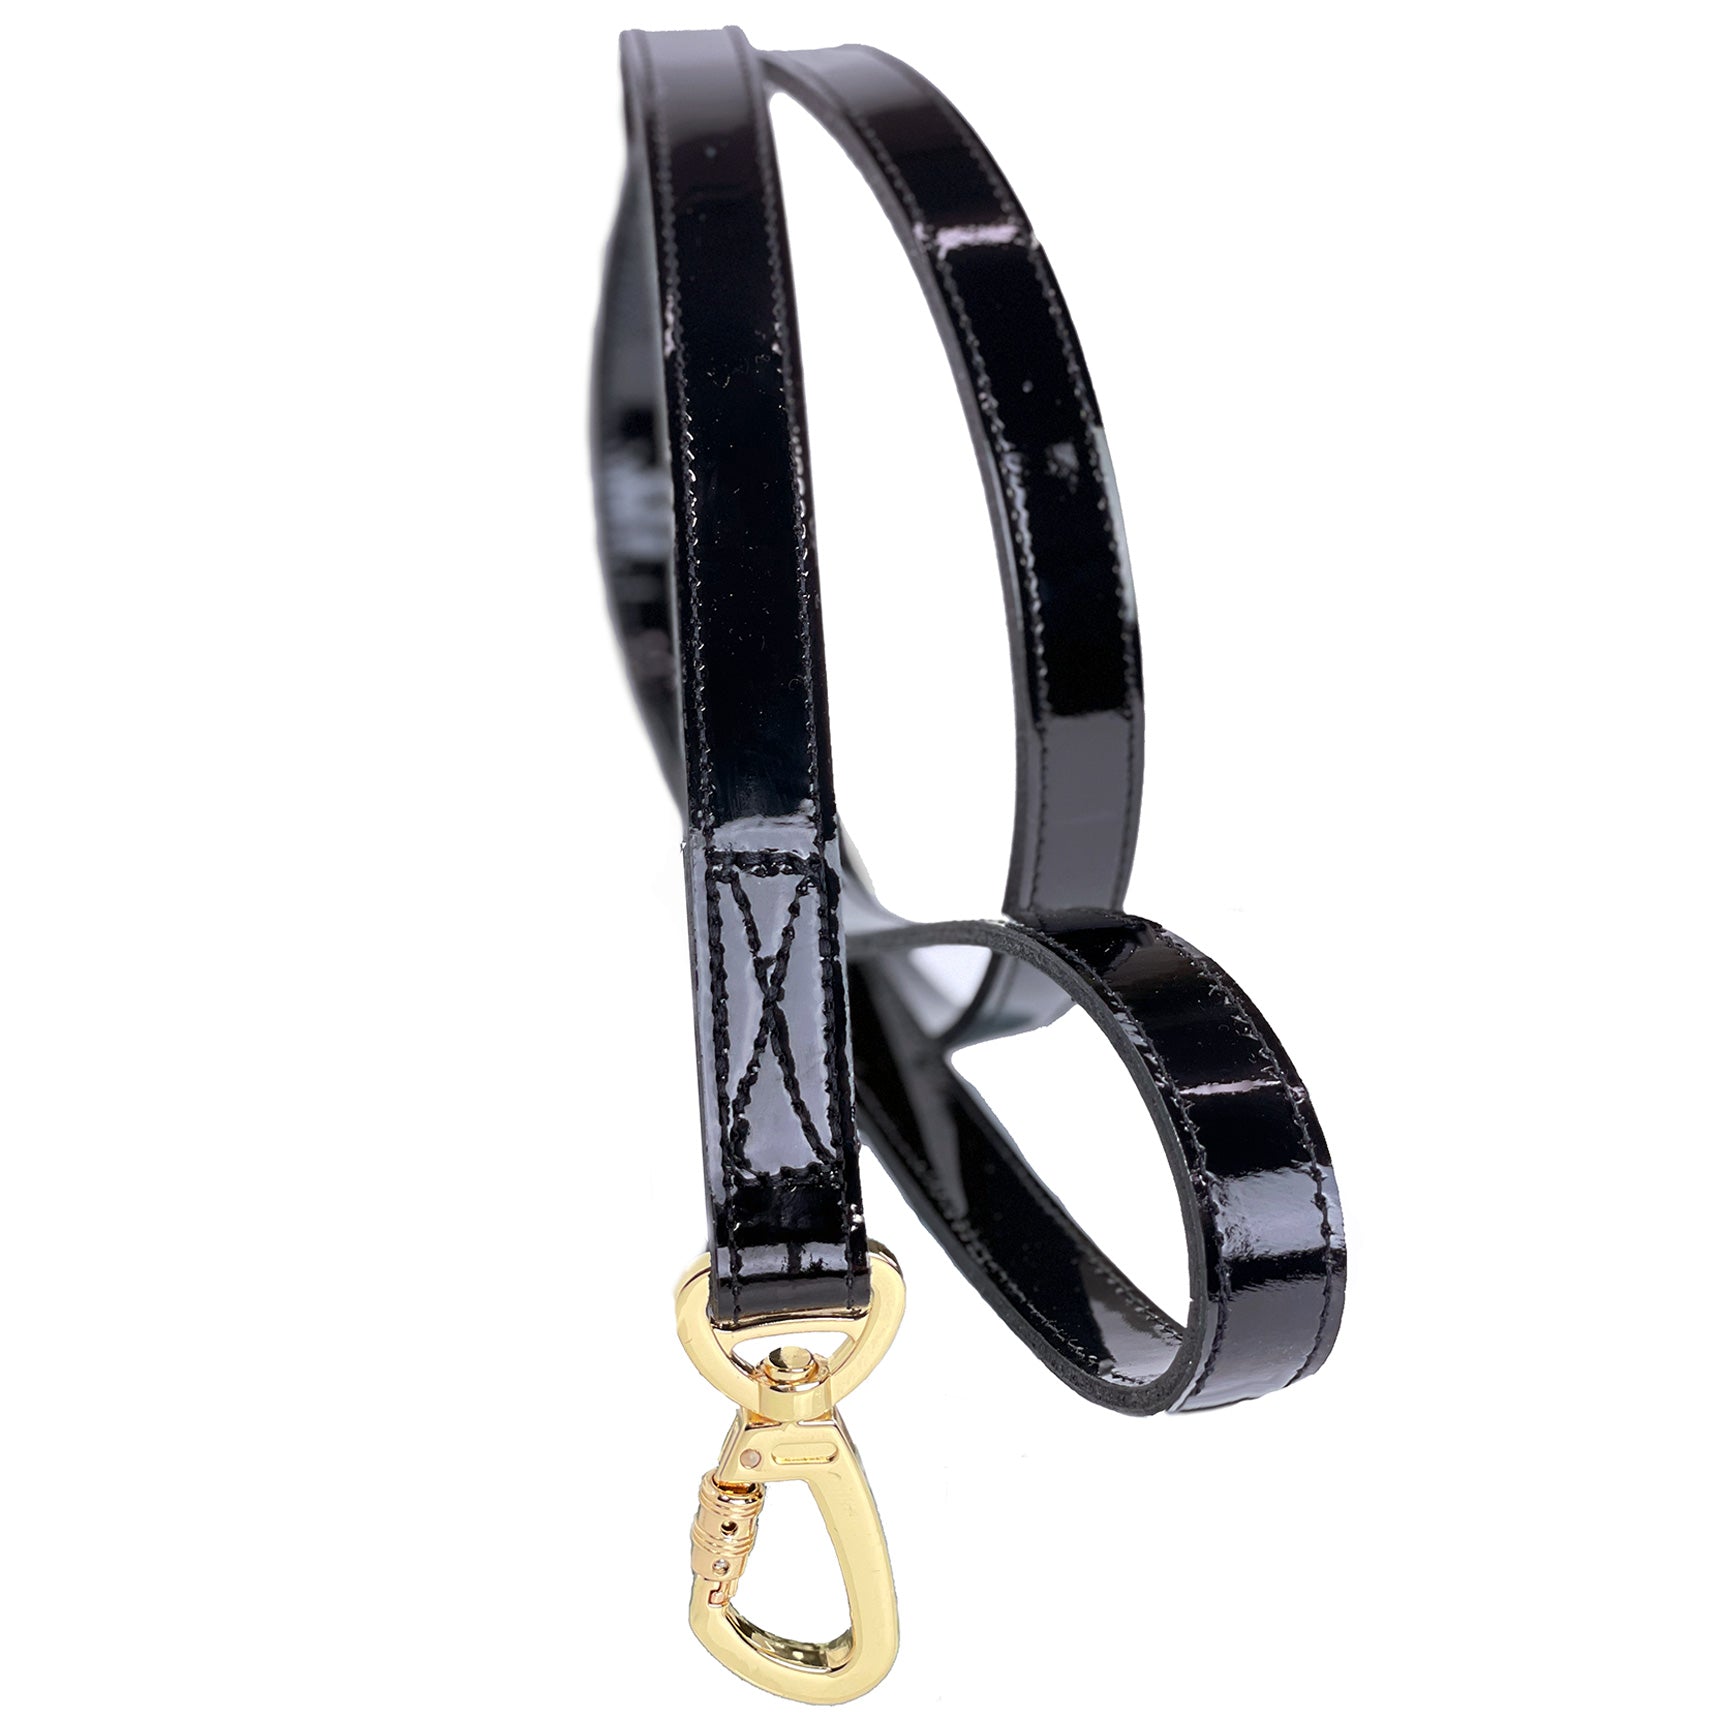 Octagon Dog Leash in Black Patent, Golden Shadow & Gold